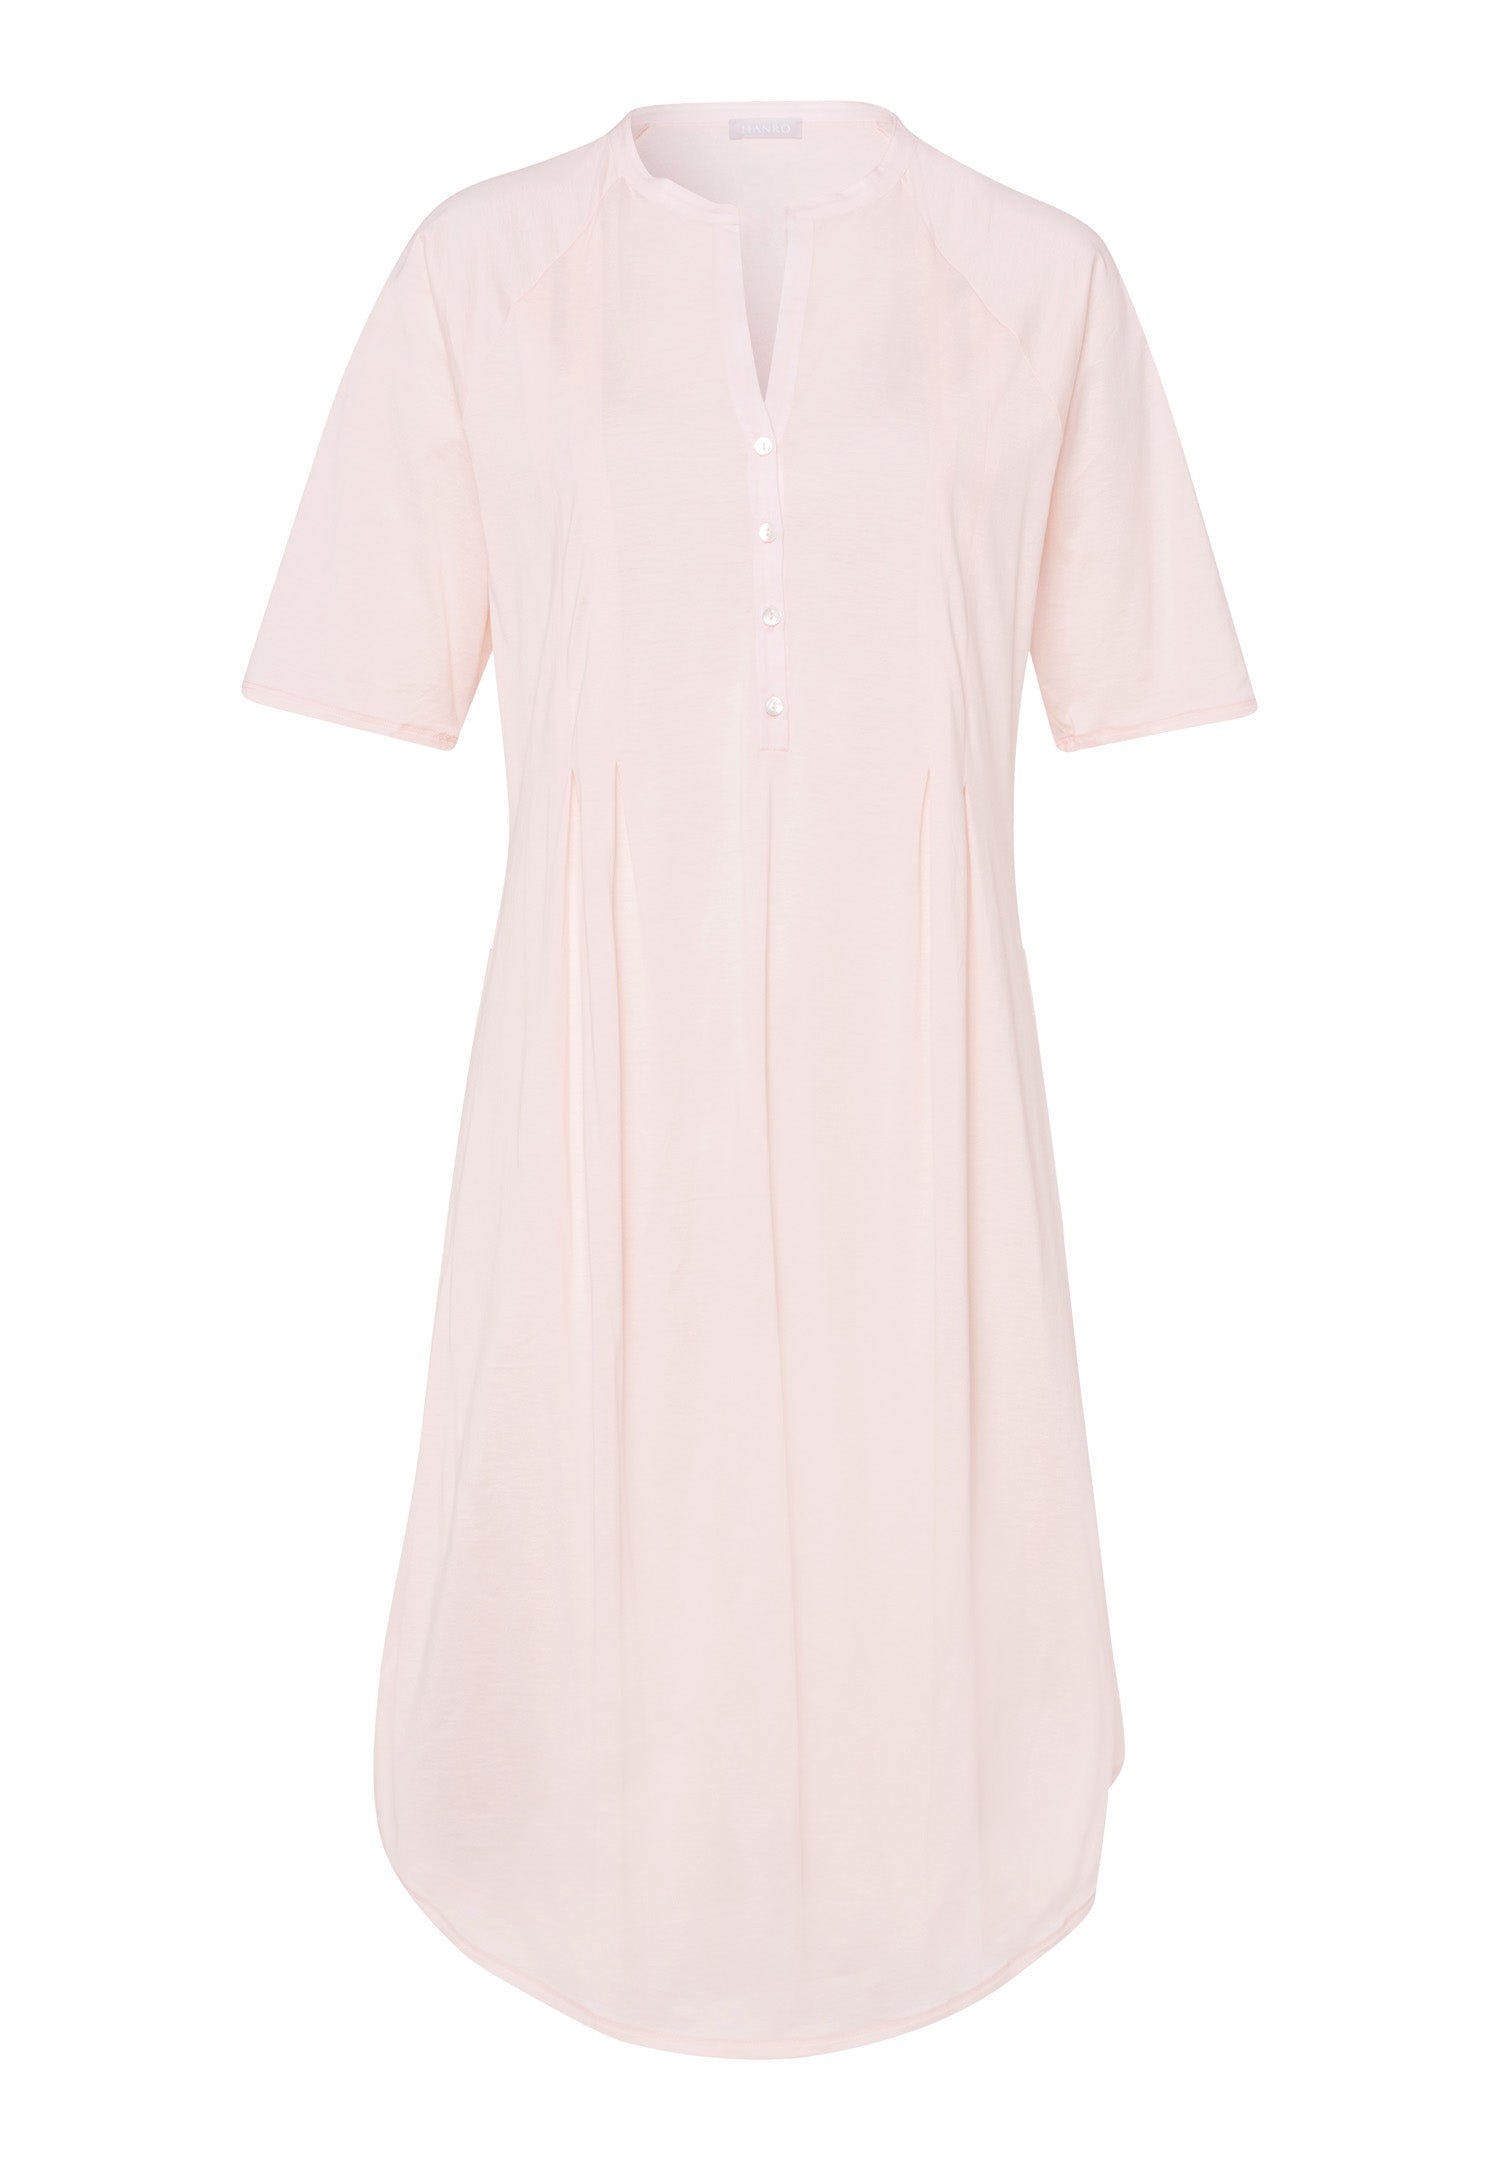 77954 Cotton Deluxe Short Sleeve Button Front Gown - 1334 Crystal Pink